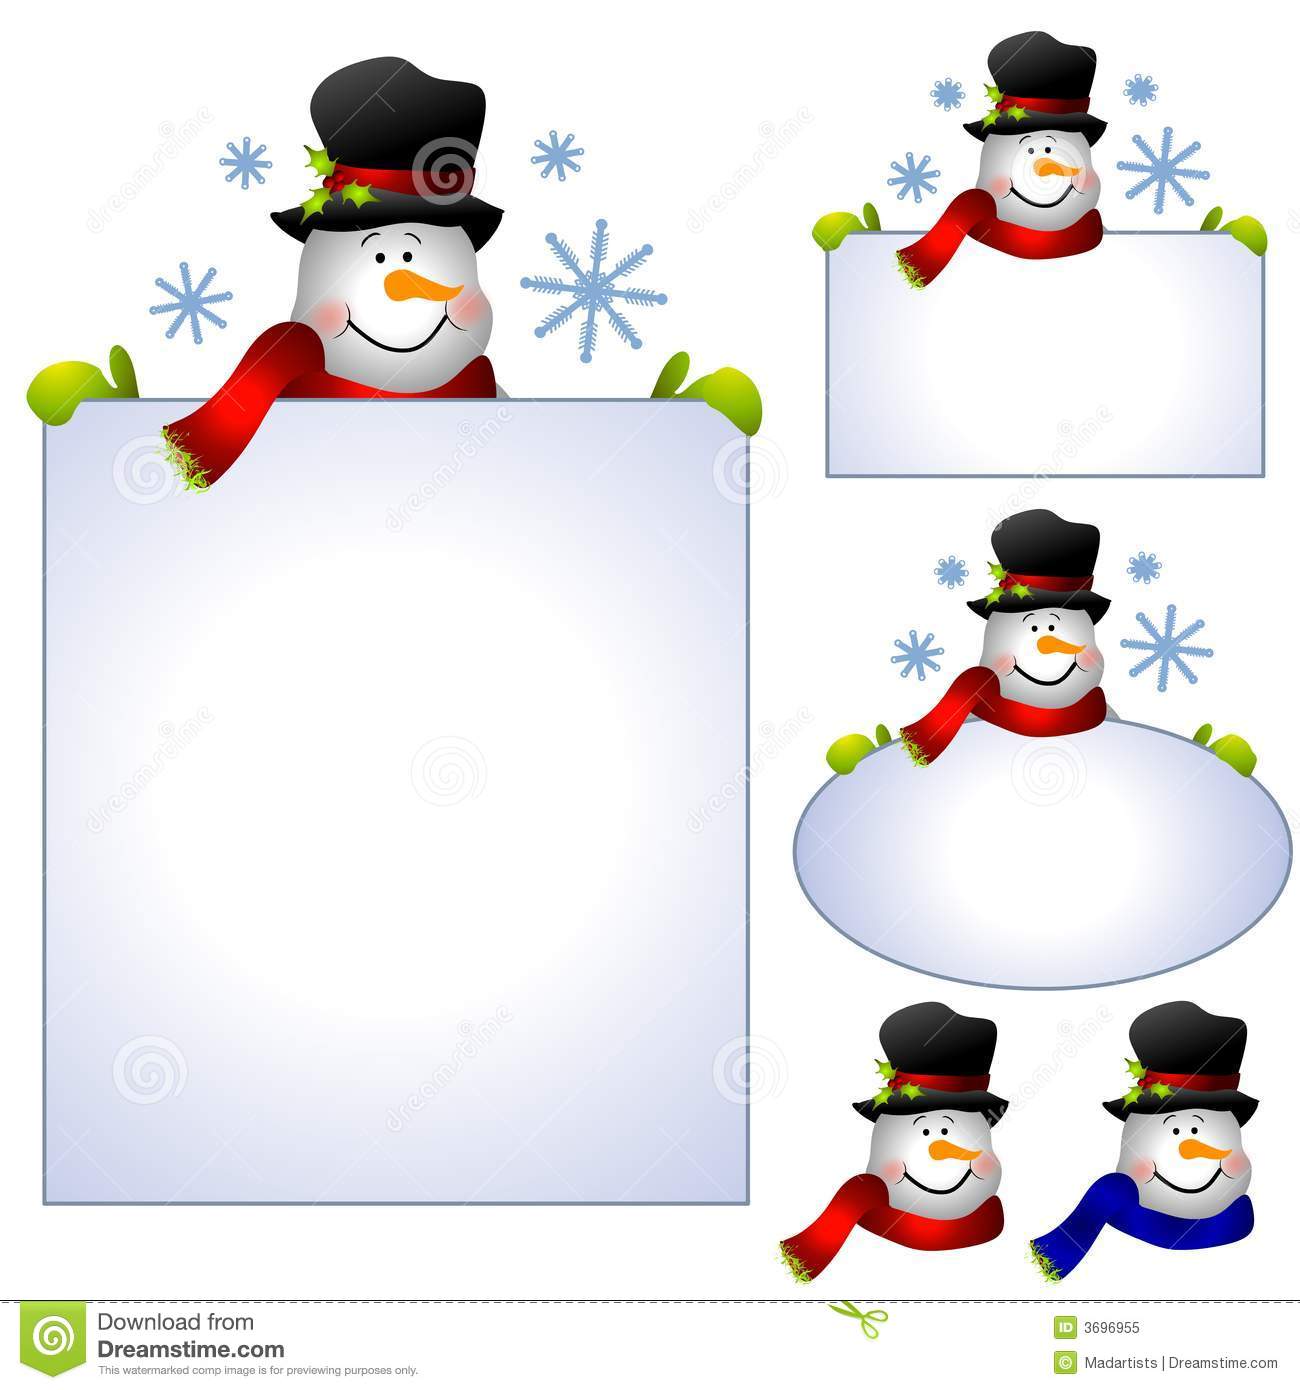 Clip Art Illustration Of Your Choice Of 5 Snowman Images Featuring